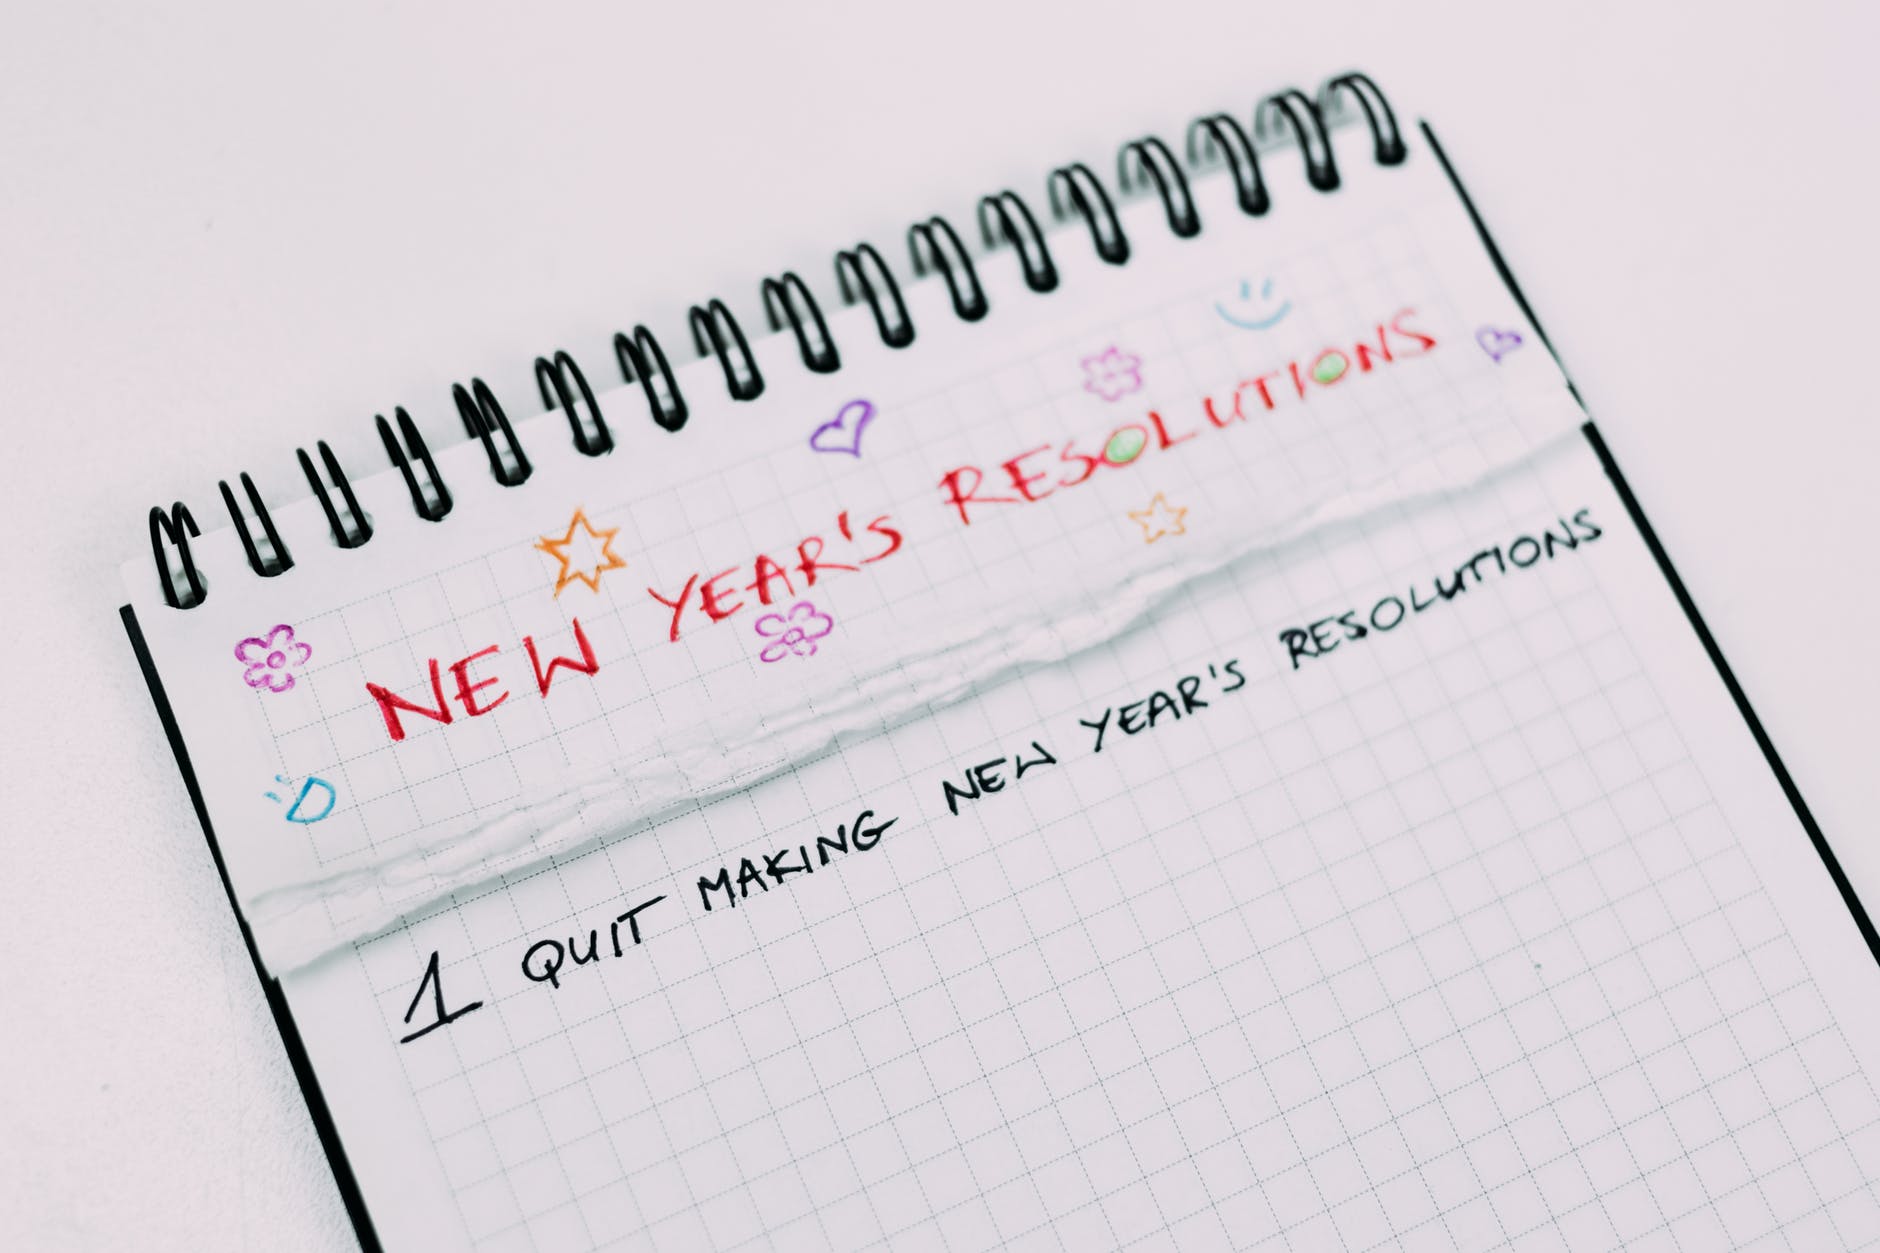 10 New Year Resolutions Every Youth Should Take in 2022